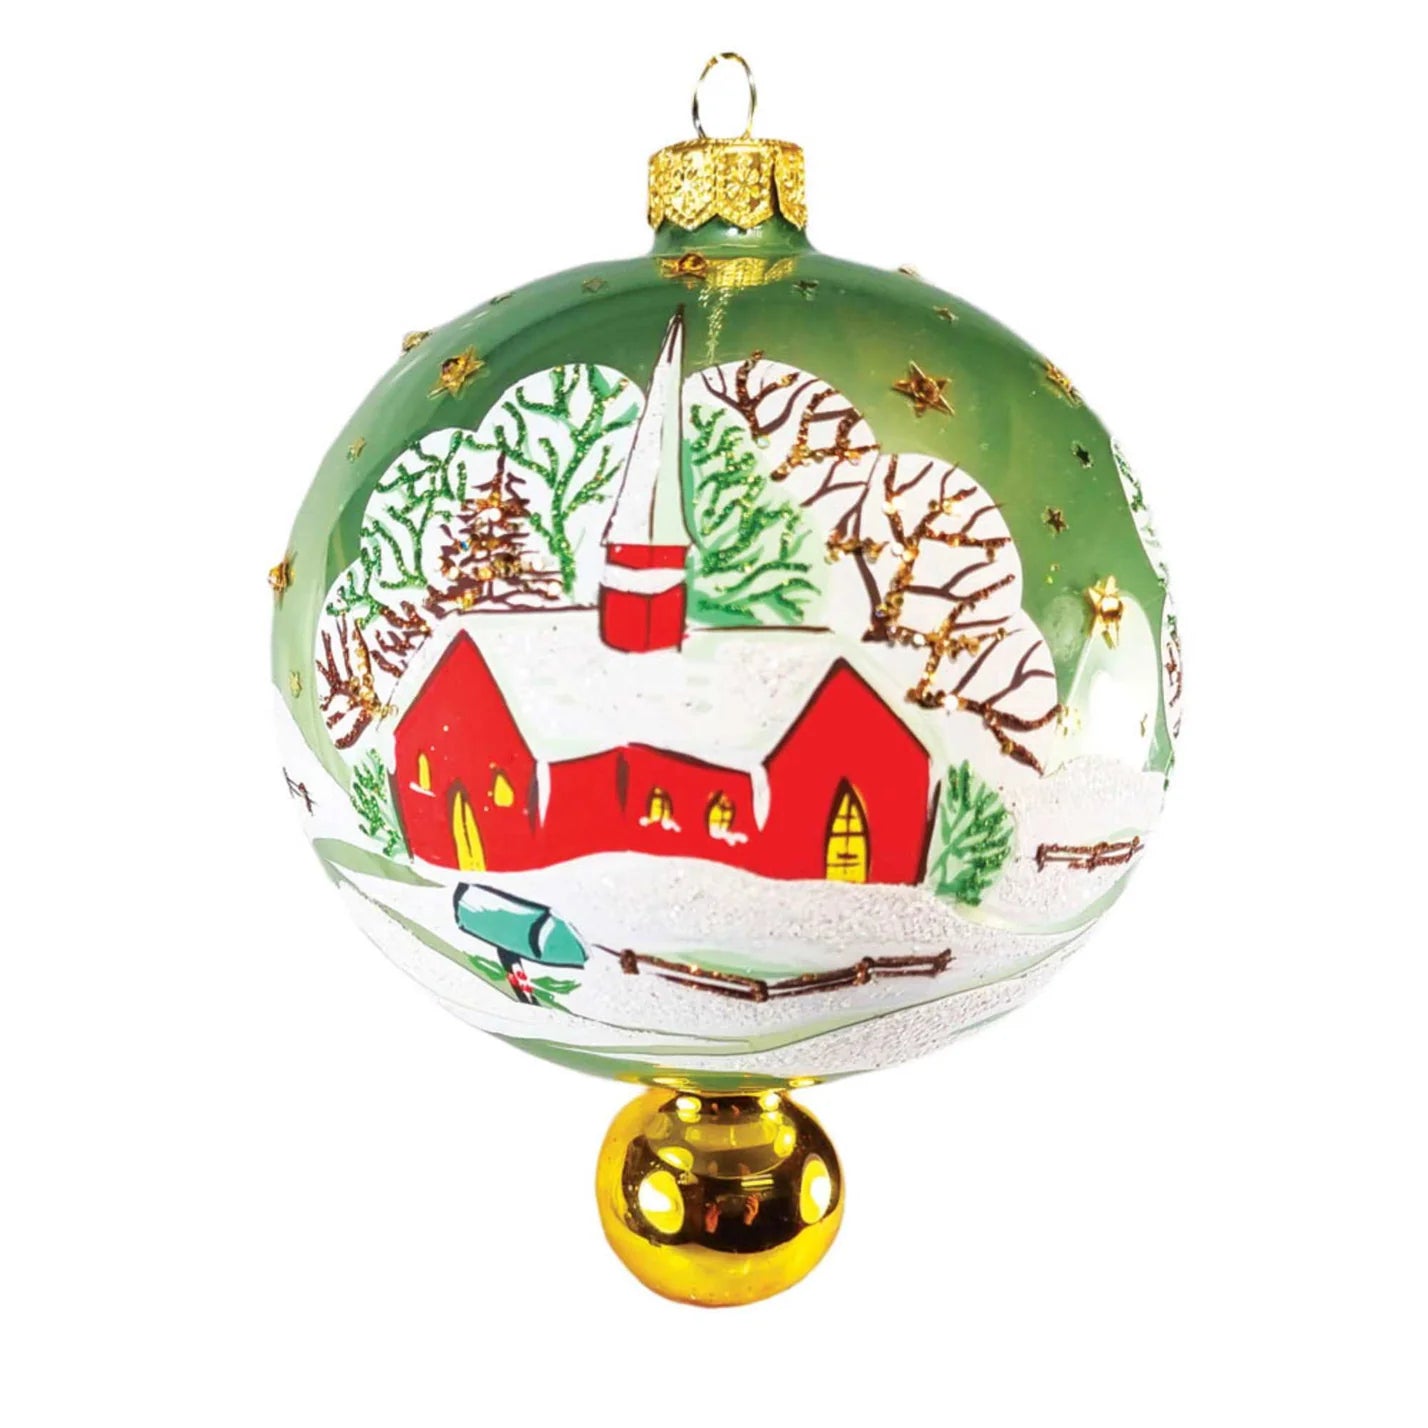 Heartfully Yours Country Chapel glass Christmas ornament 